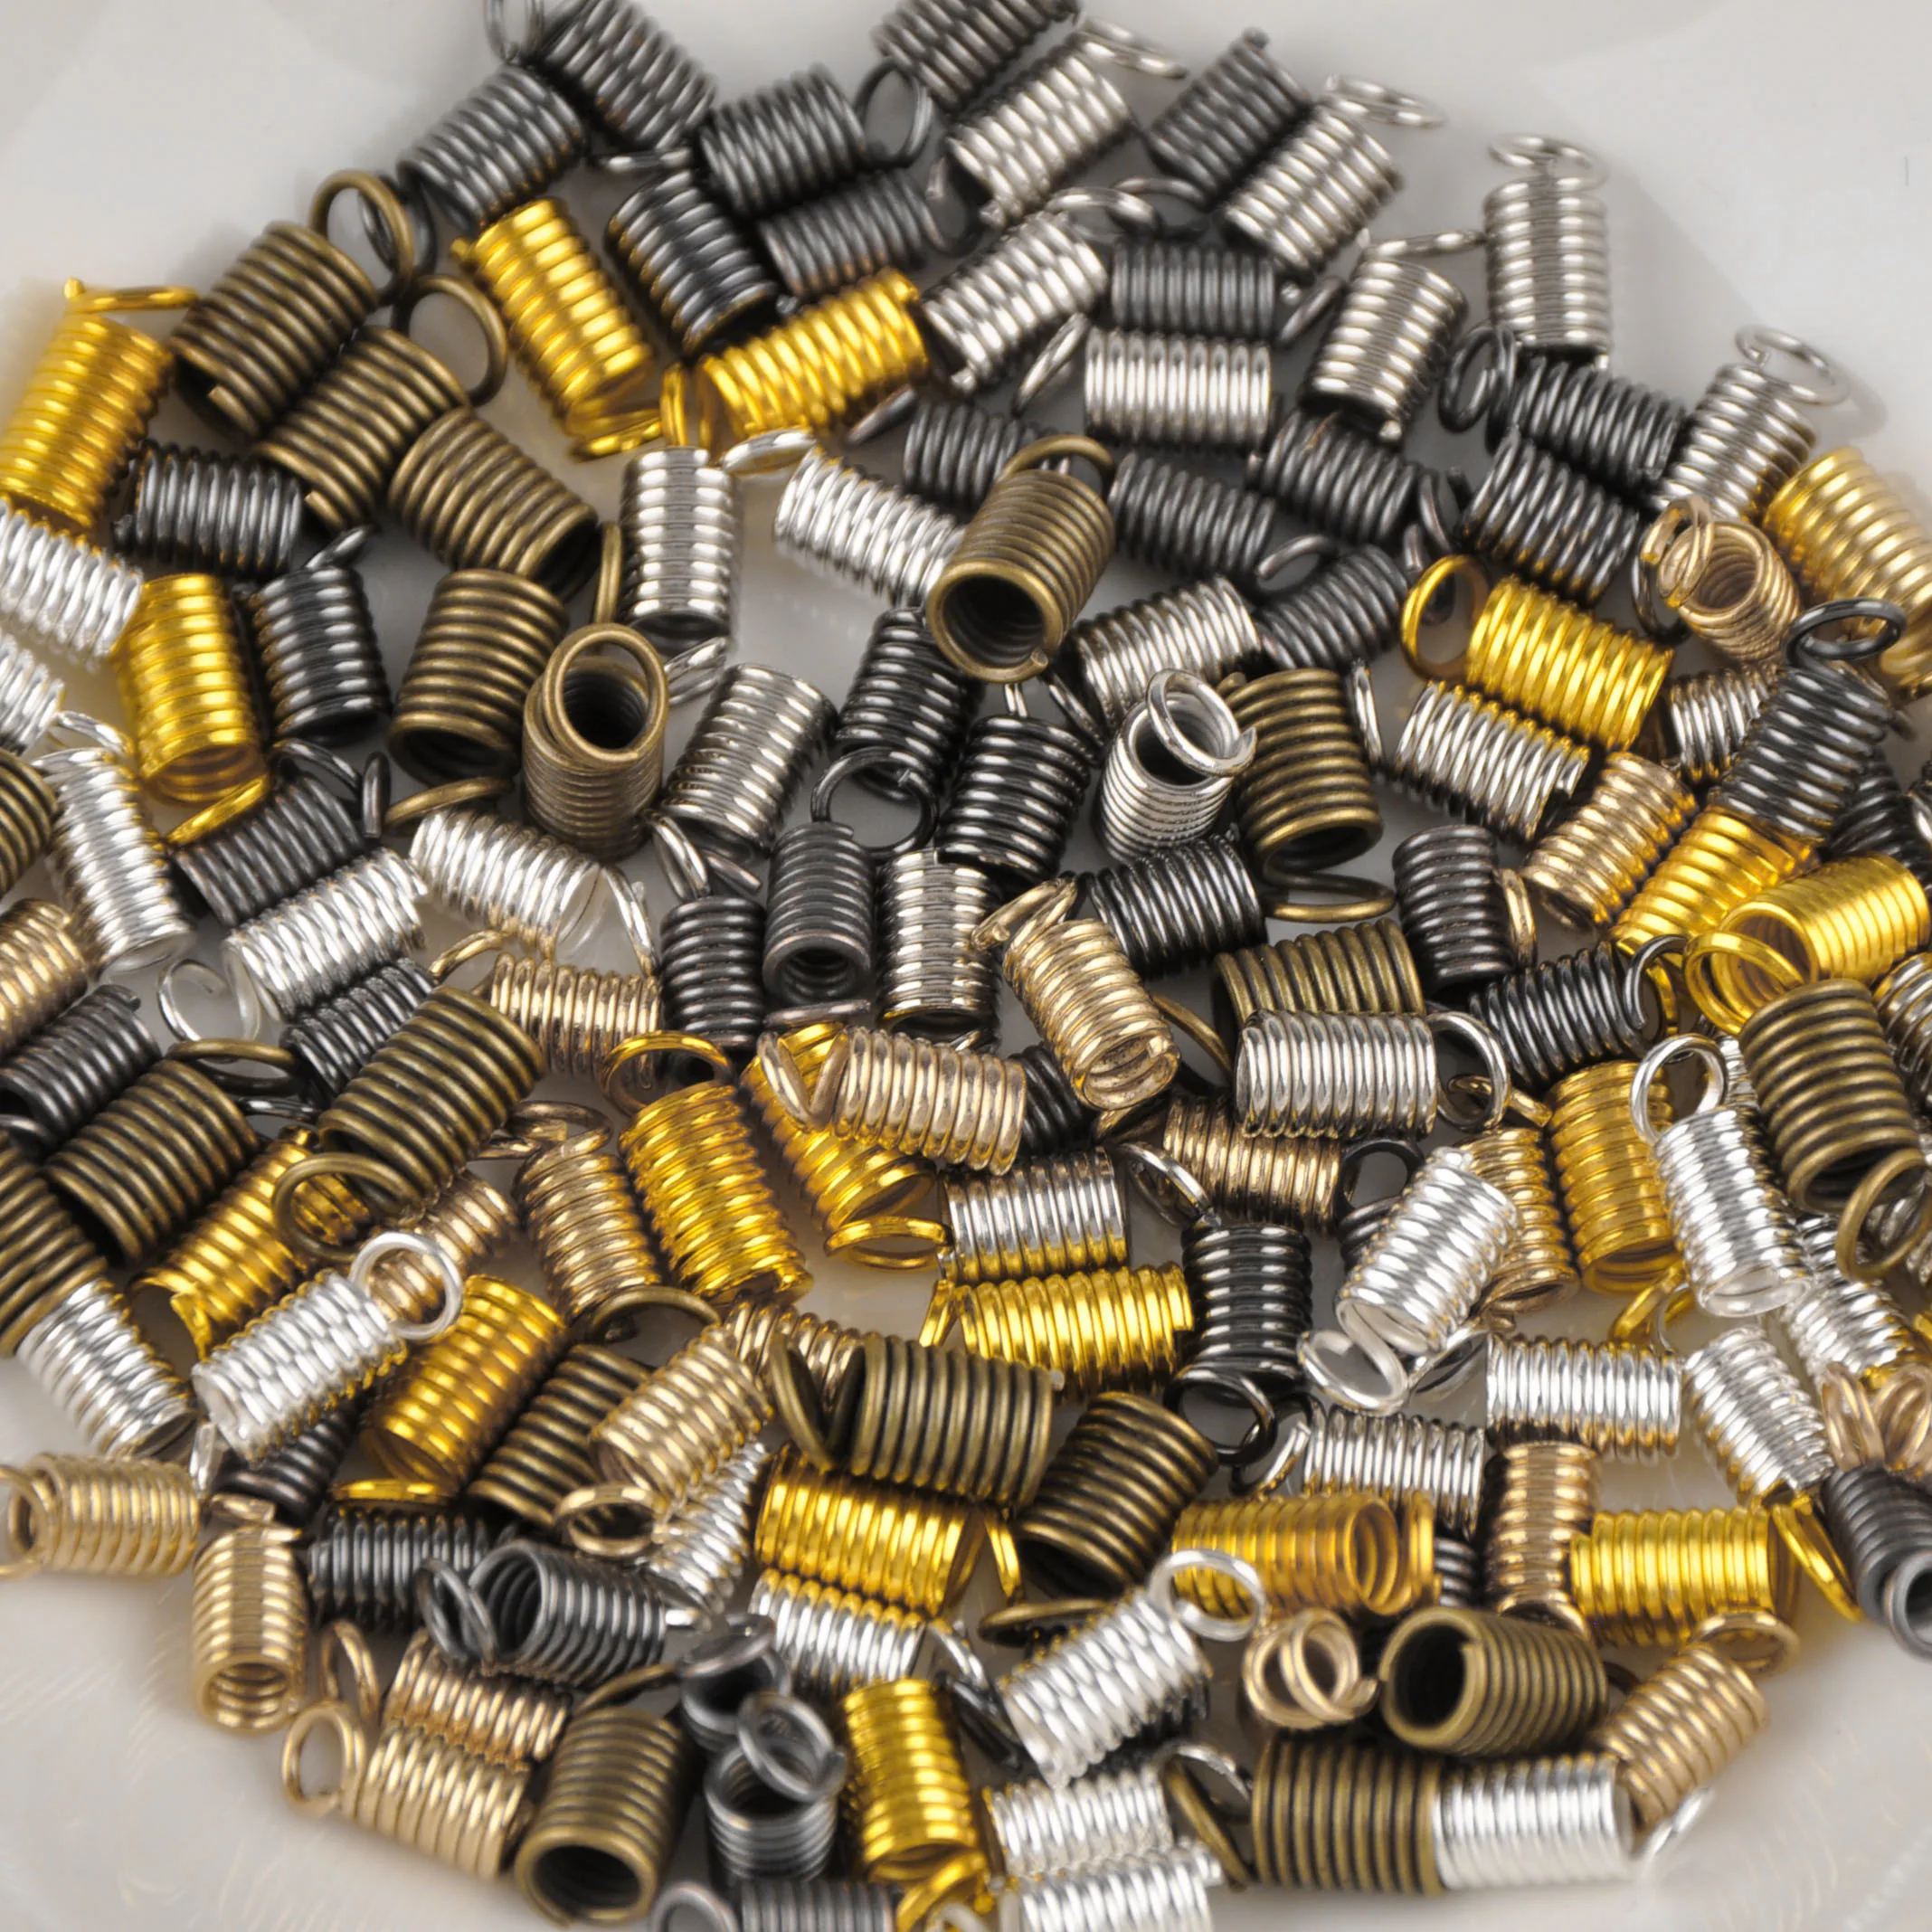 

1000piece Spring Crimp Ends Fastener Connectors Crimp Beads Fits Round Leather Cord DIY Jewelry Making Findings